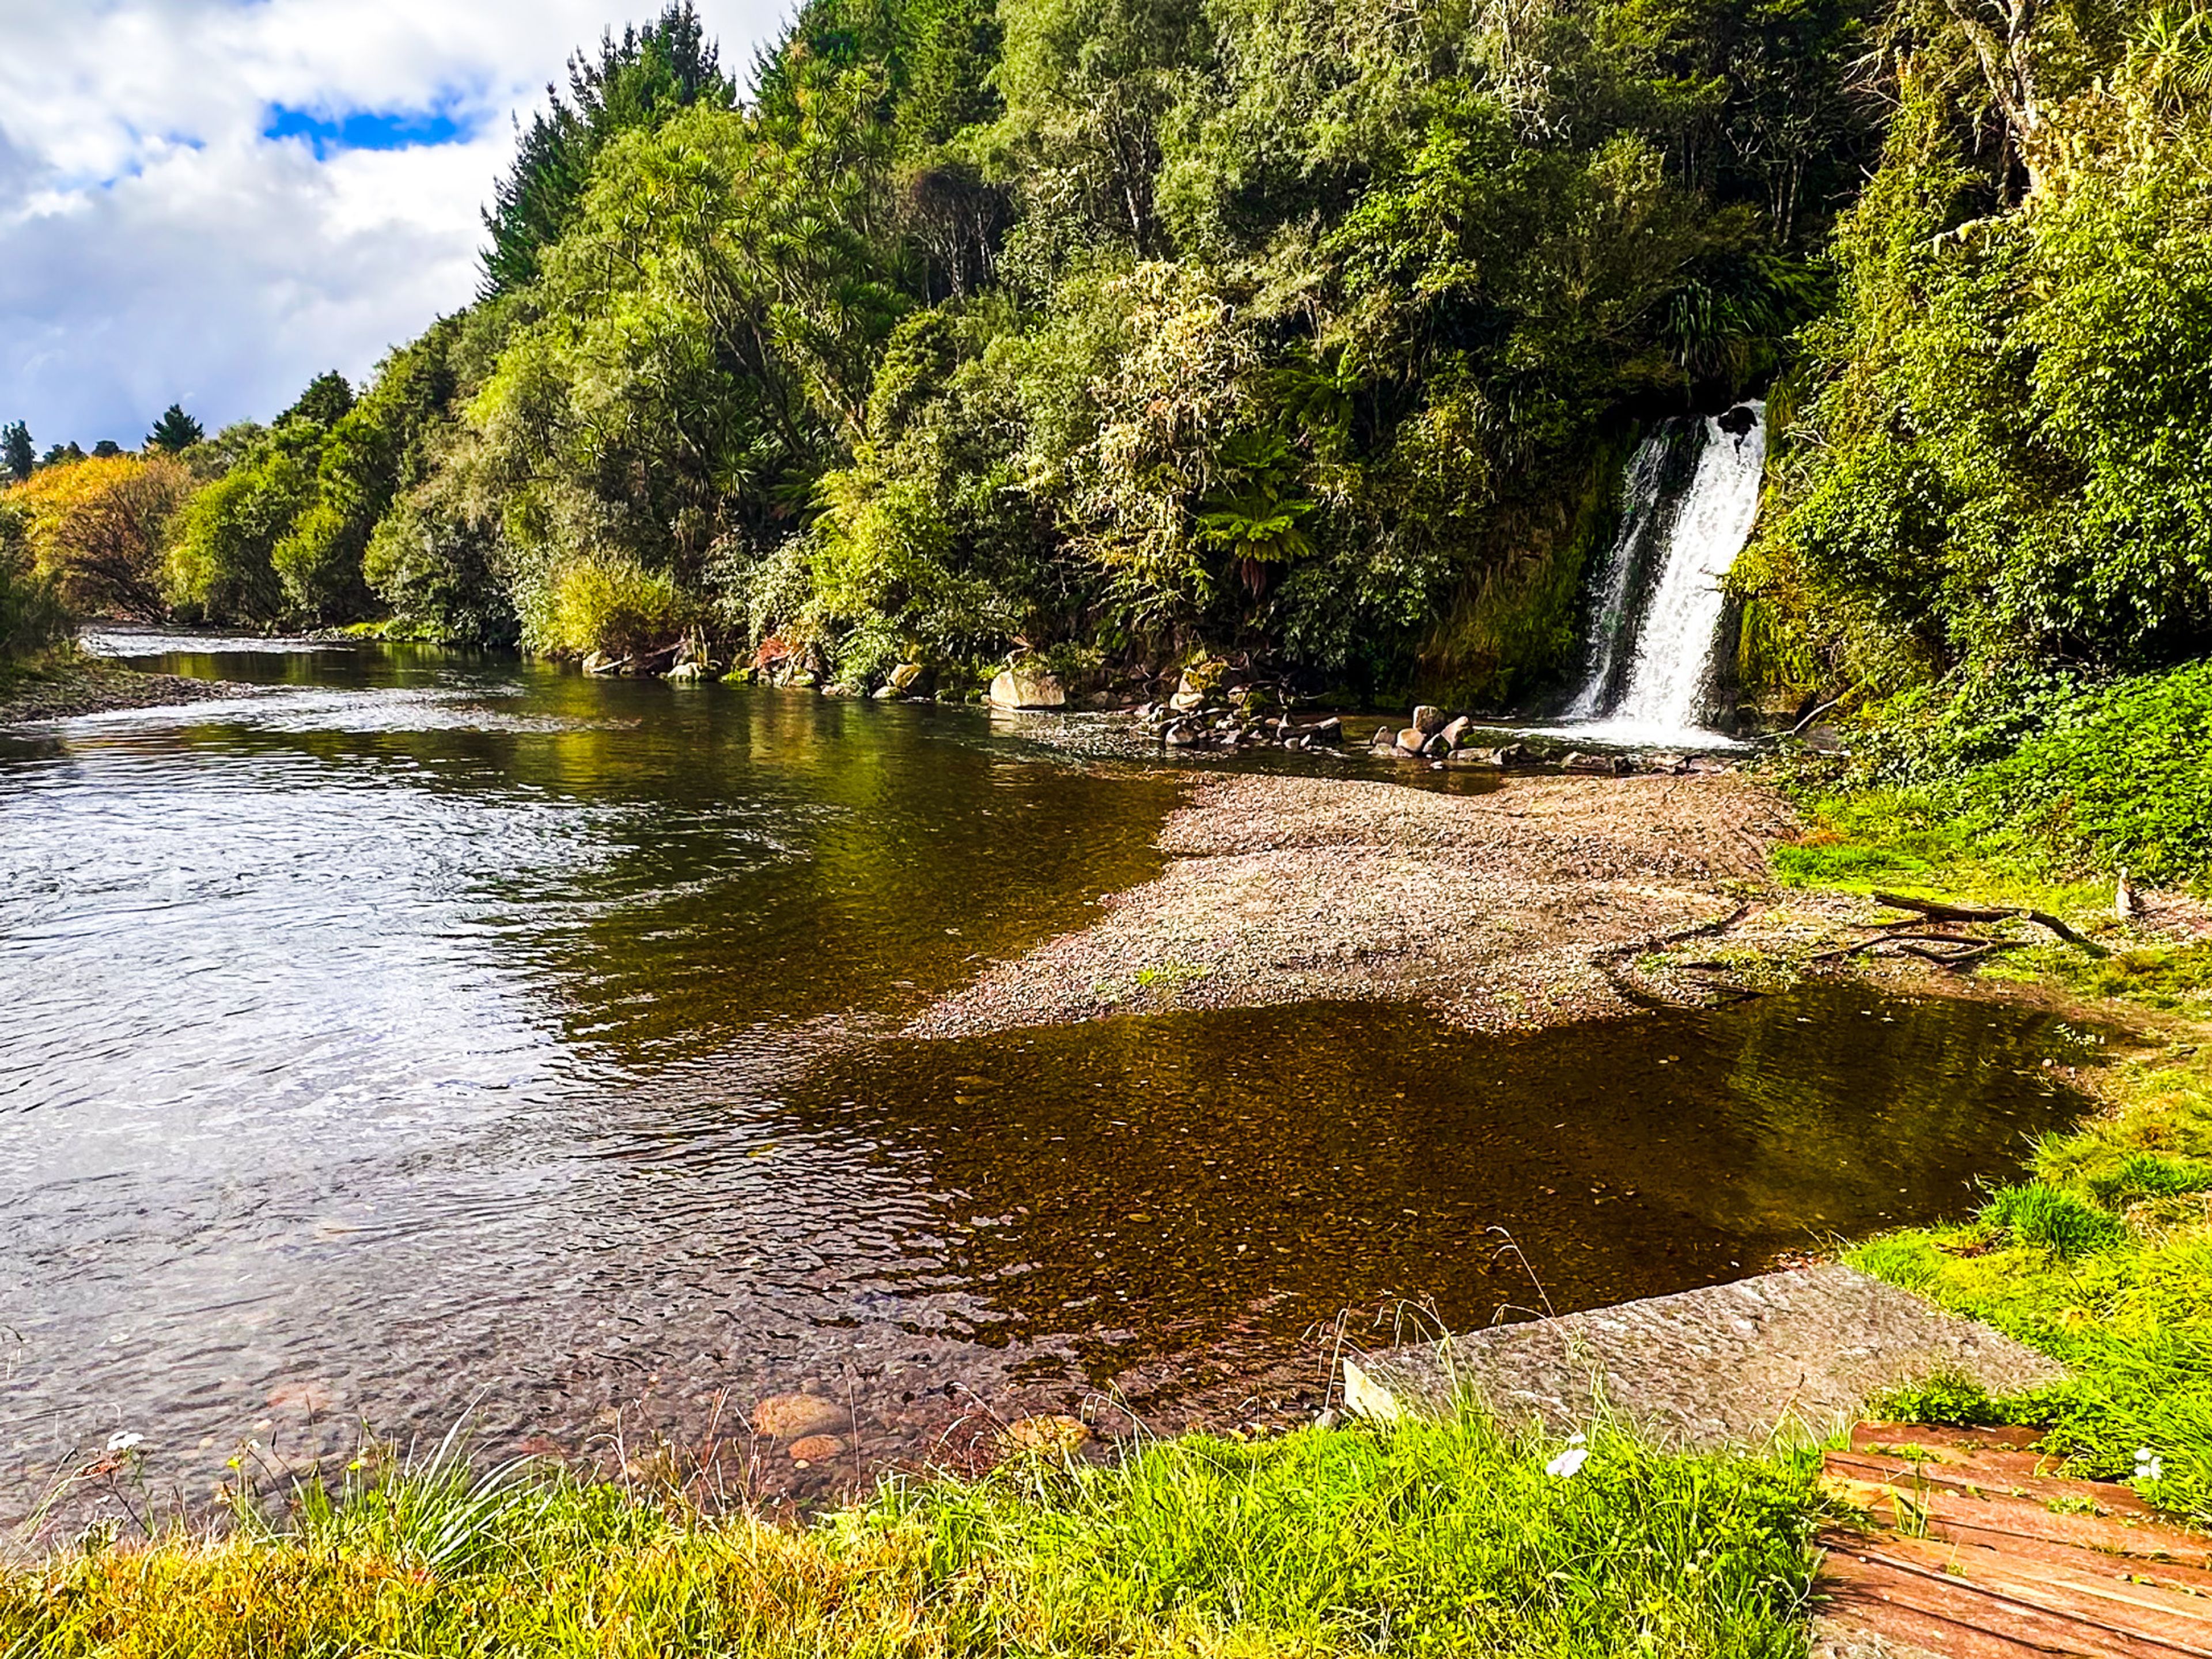 The Magamate Falls, surrounded by forest and dropping into the Whirinaki River